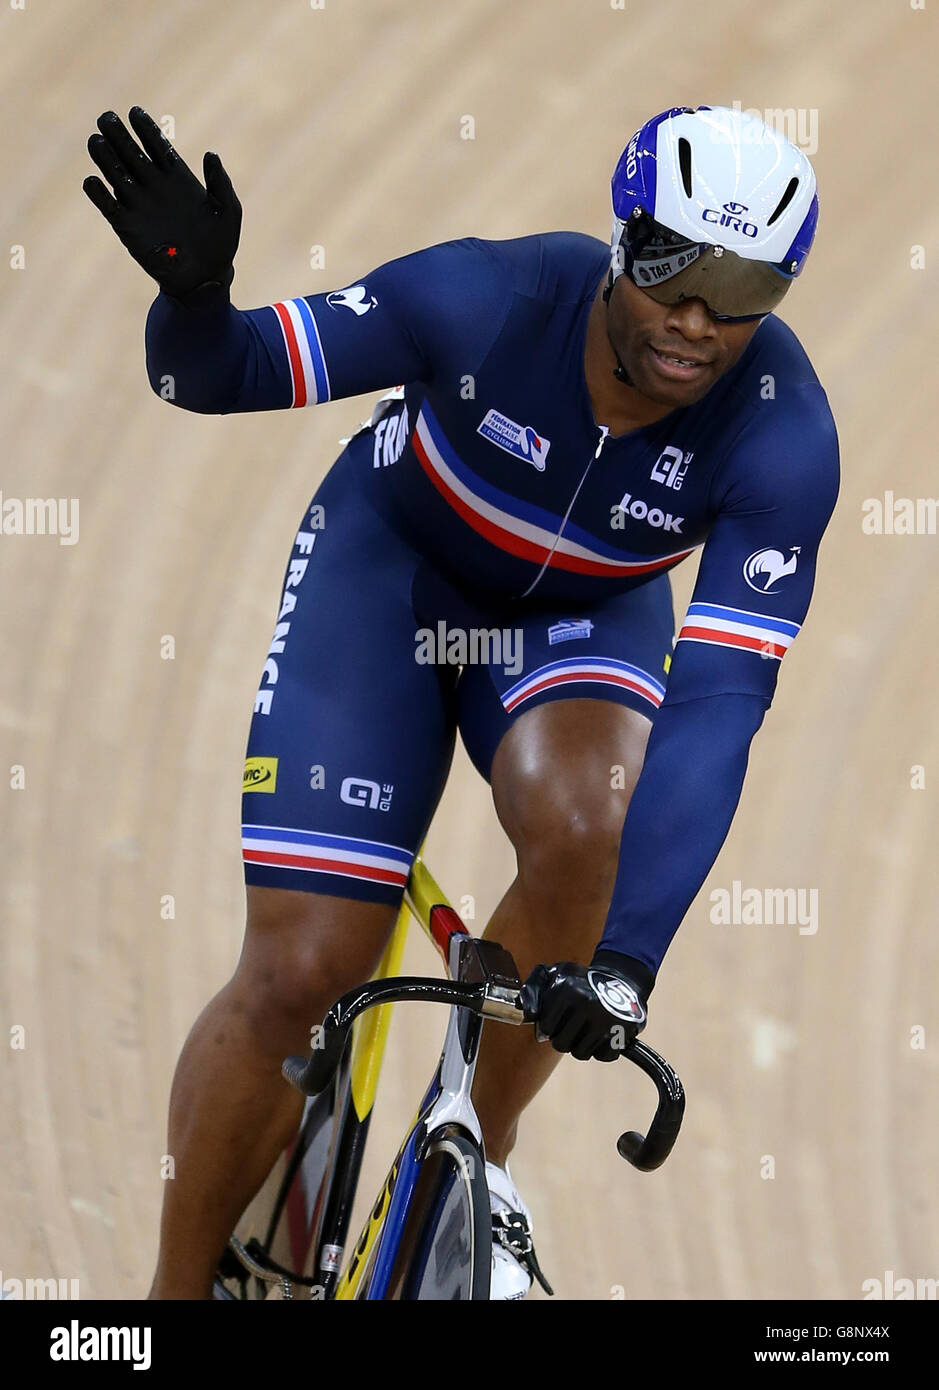 France's Gregory Bauge waves to the crowd after competing in the Men's Sprint during day three of the UCI Track Cycling World Championships at Lee Valley VeloPark, London. Stock Photo